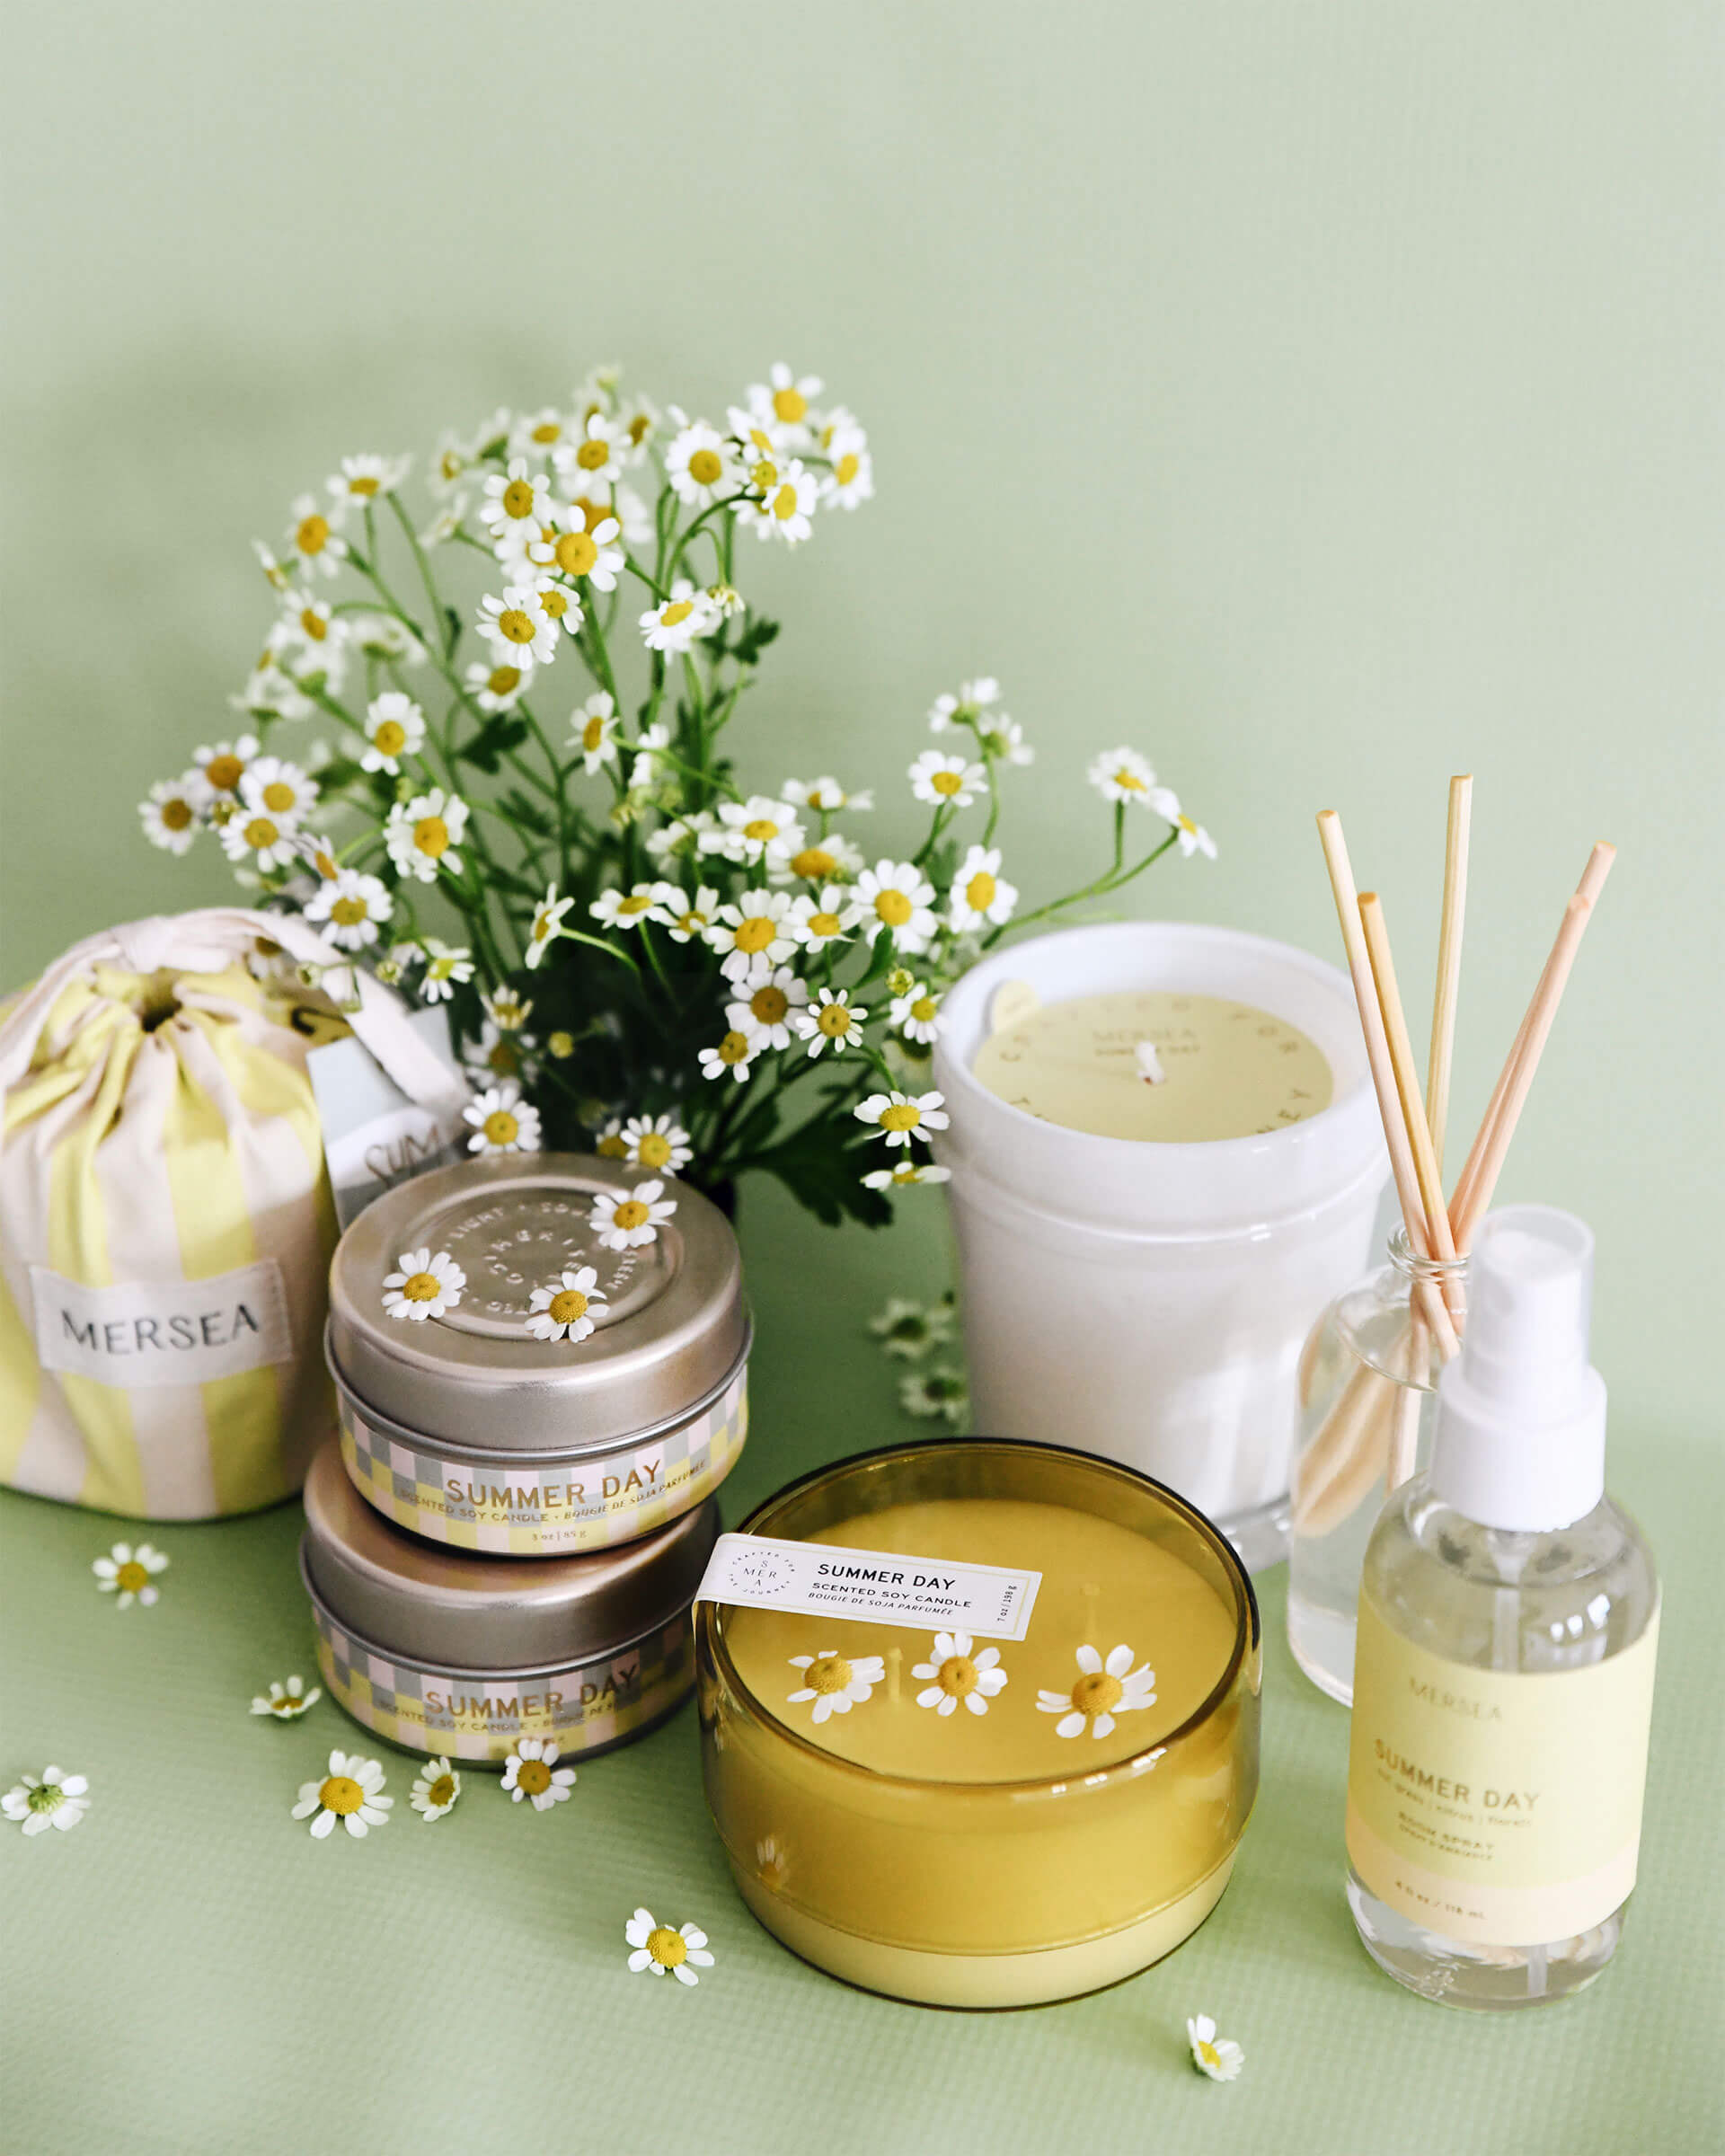 Summer Day product collection of candles, room sprays and diffusers in front of yellow background